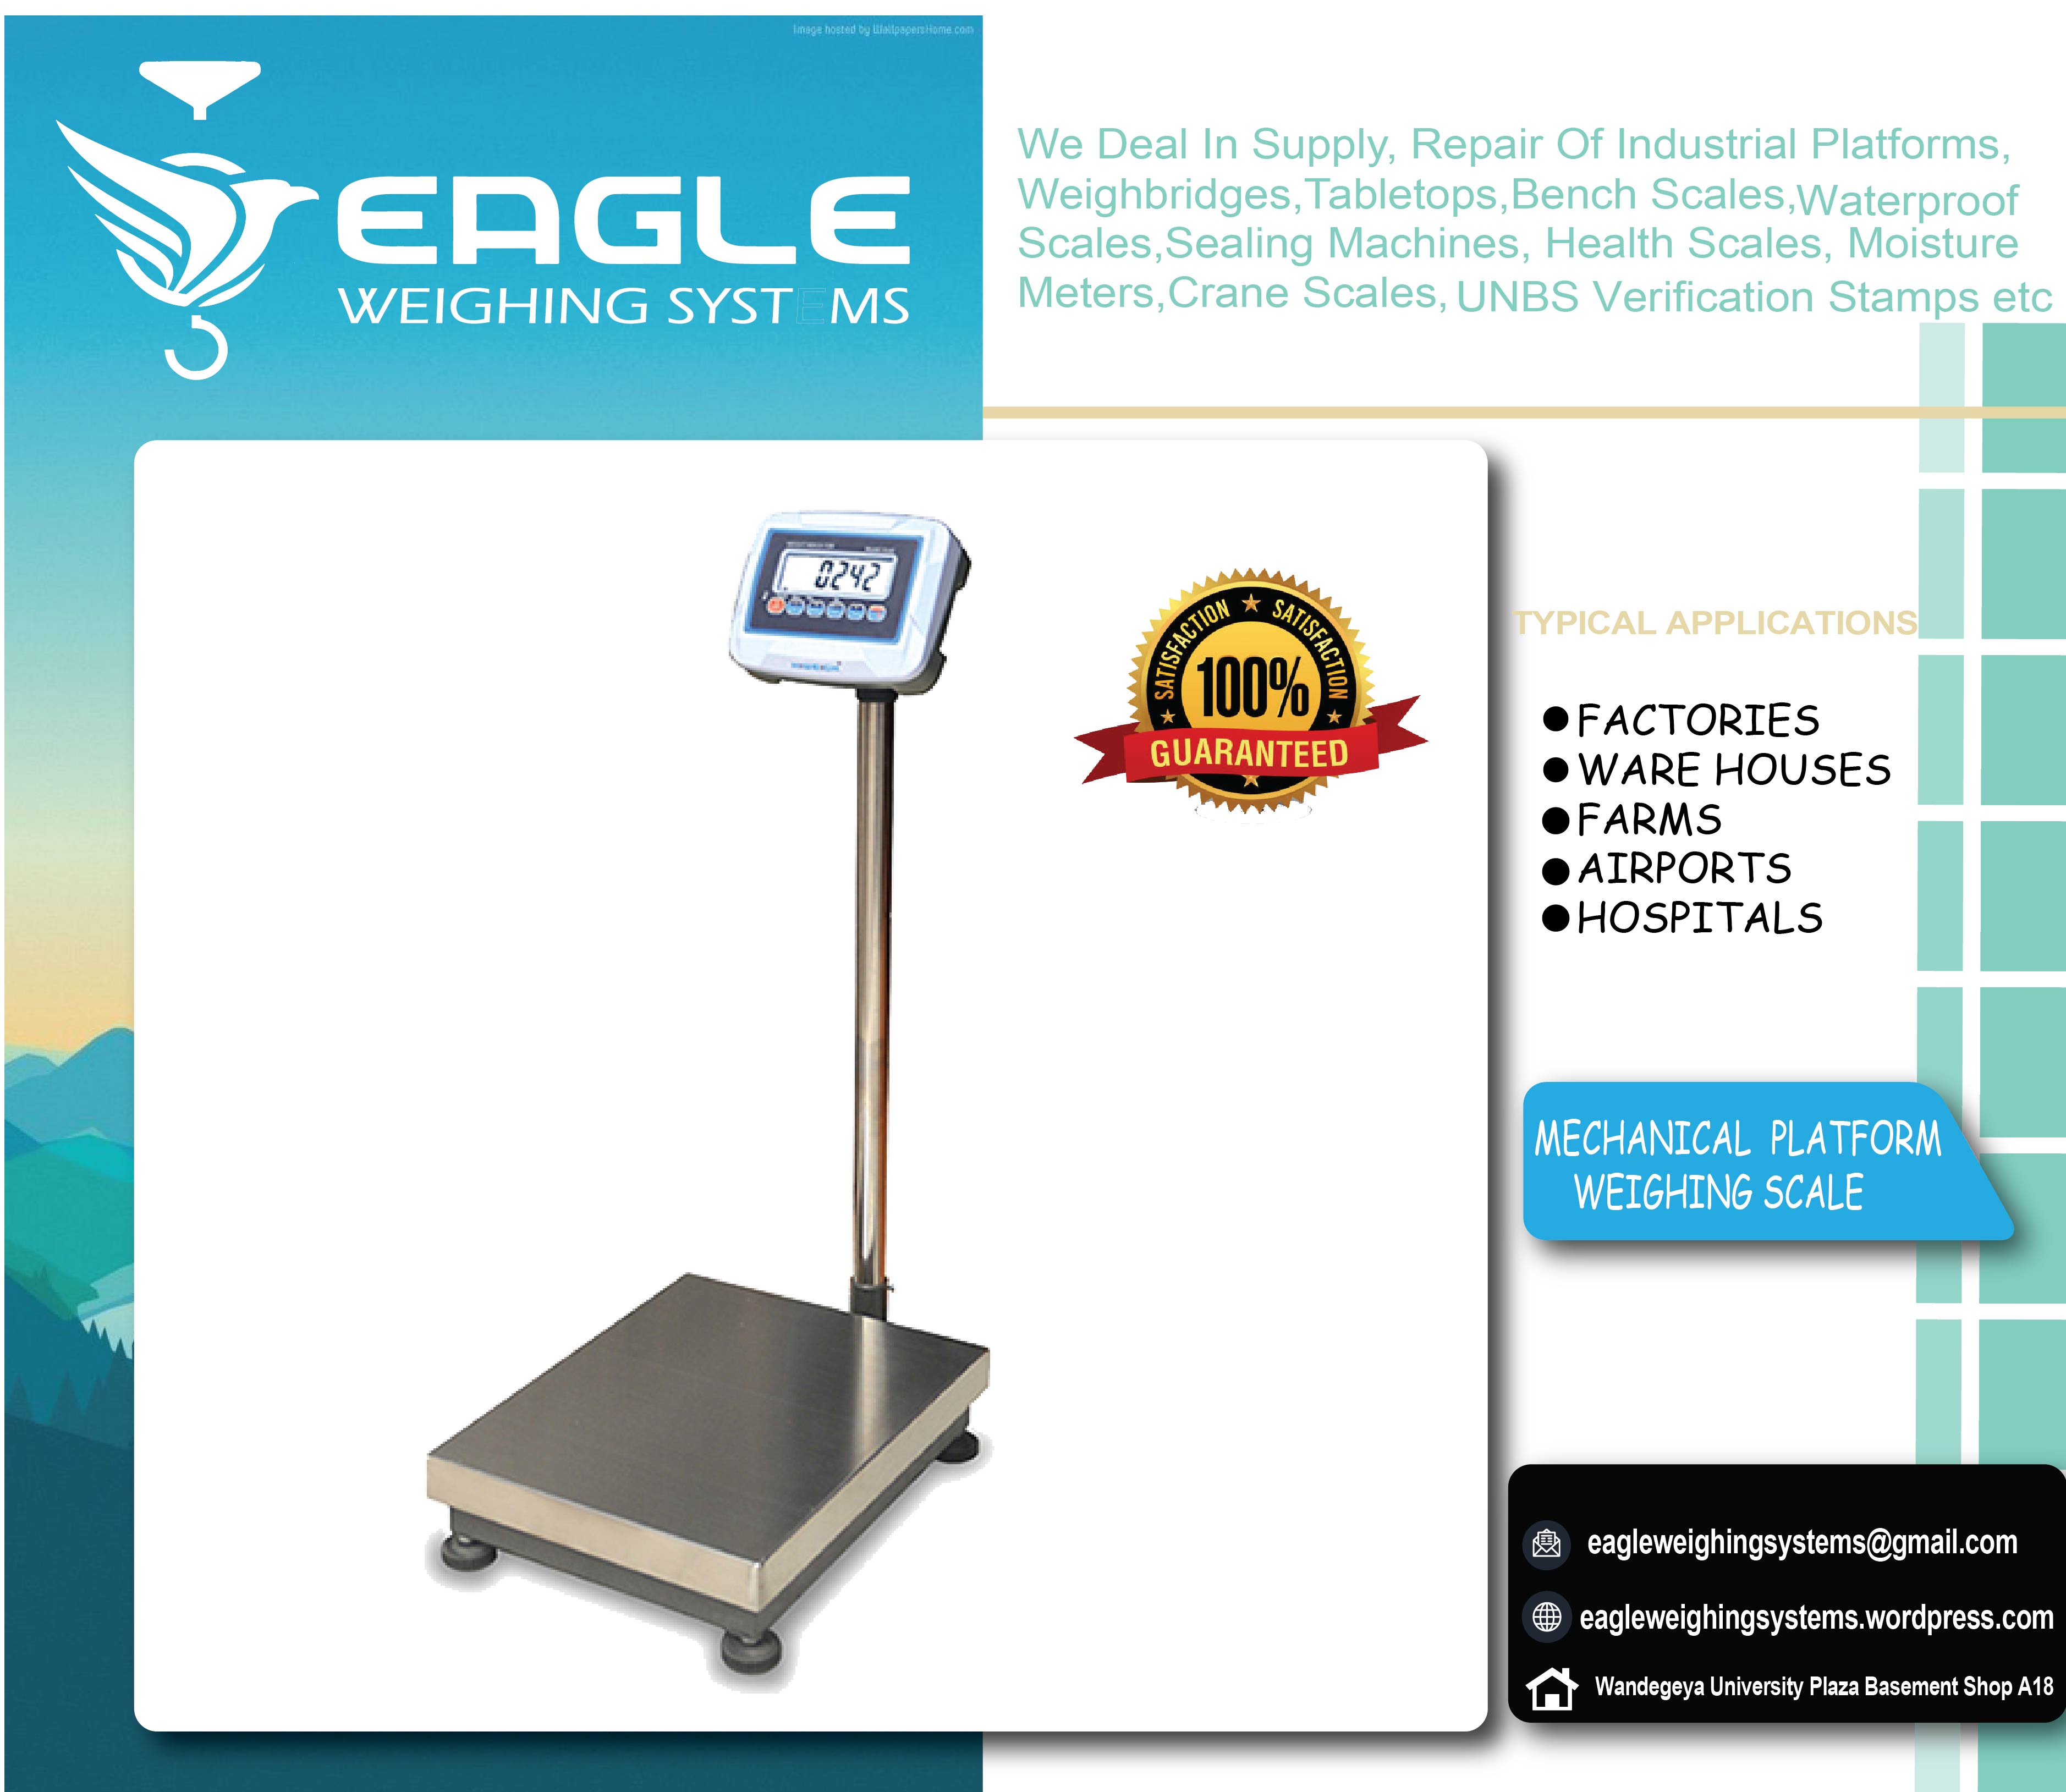 +256 (0) 700225423 Low Price Guaranteed Quality stainless electronic platform scale, Kampala District, Central, Uganda